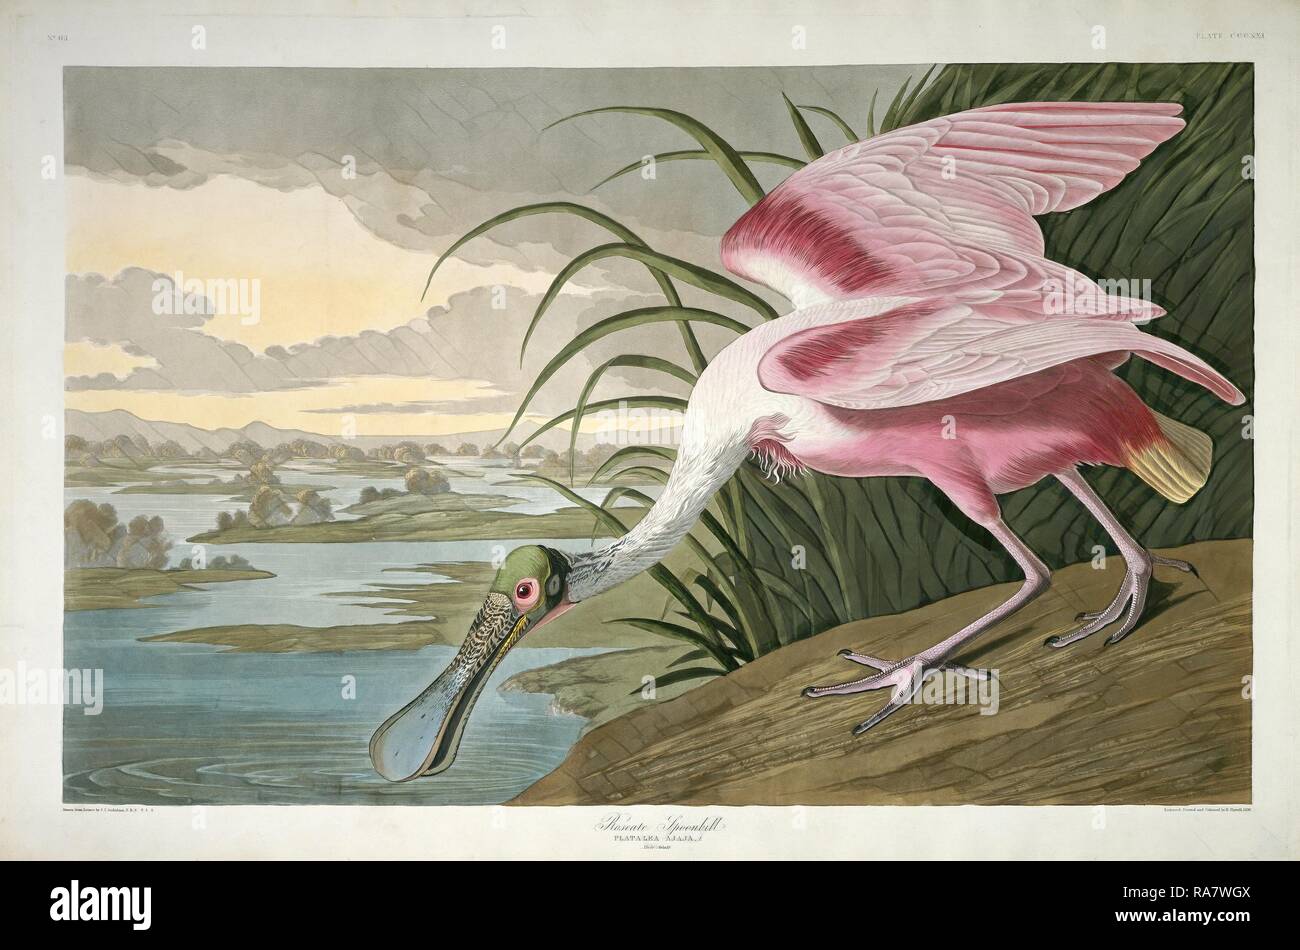 Robert Havell after John James Audubon, Roseate Spoonbill, American, 1793 - 1878, 1836, hand-colored etching and reimagined Stock Photo